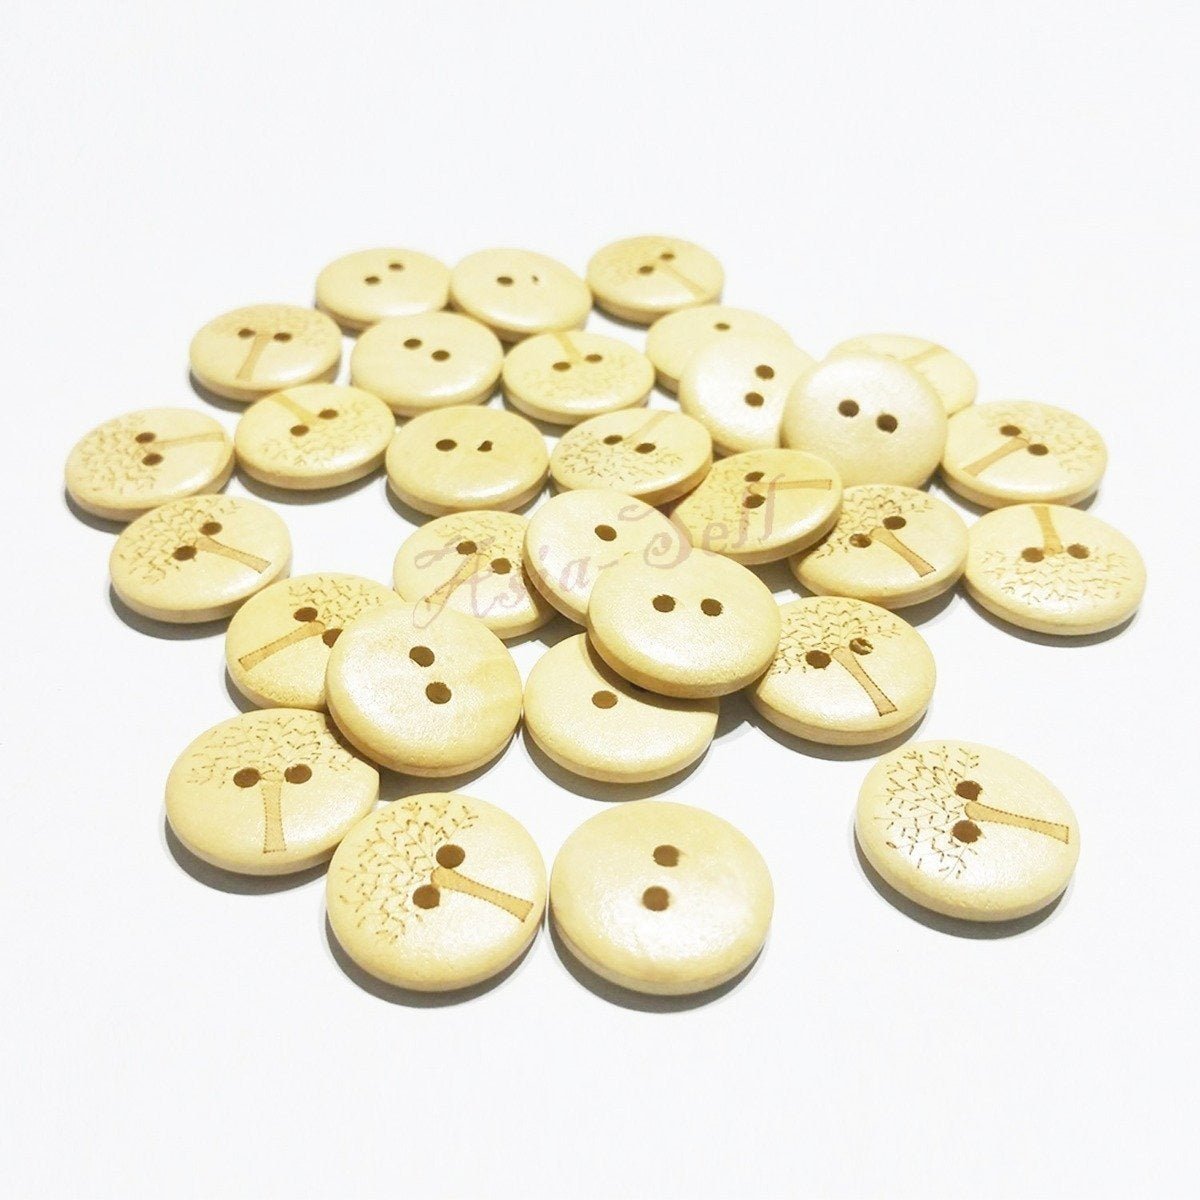 25pcs Wooden Buttons Tree Design for Clothing Craft Sewing DIY 2 Hole 20mm - Natural colour - - Asia Sell